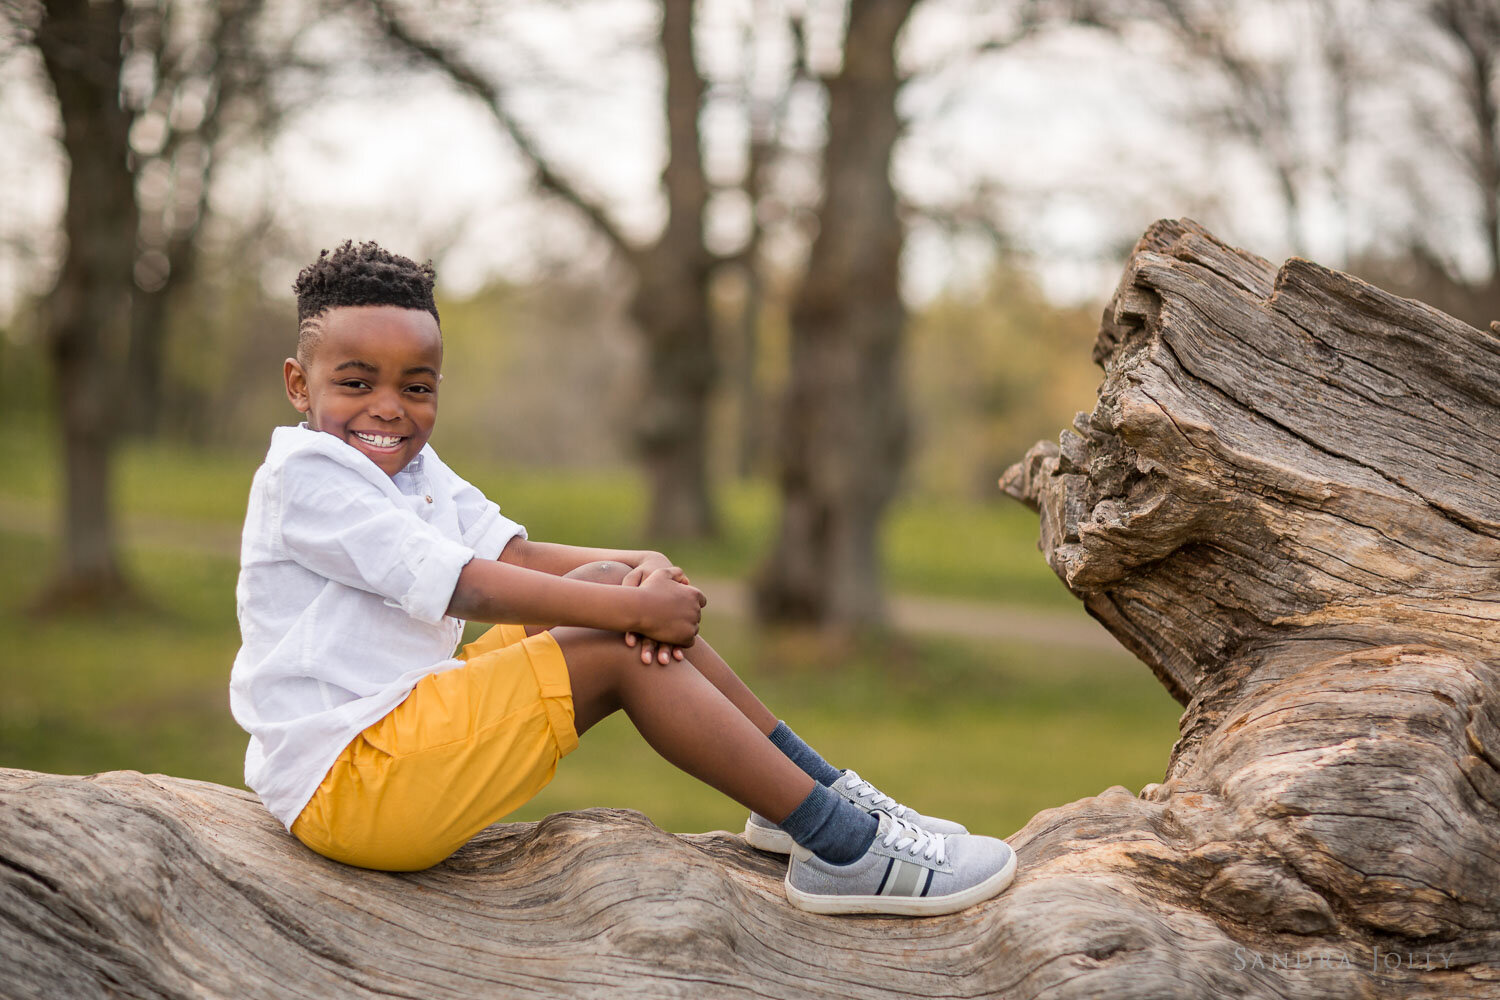 portrait-of-young-boy-on-tree-by-stockholm-photographer-sandra-jolly.jpg